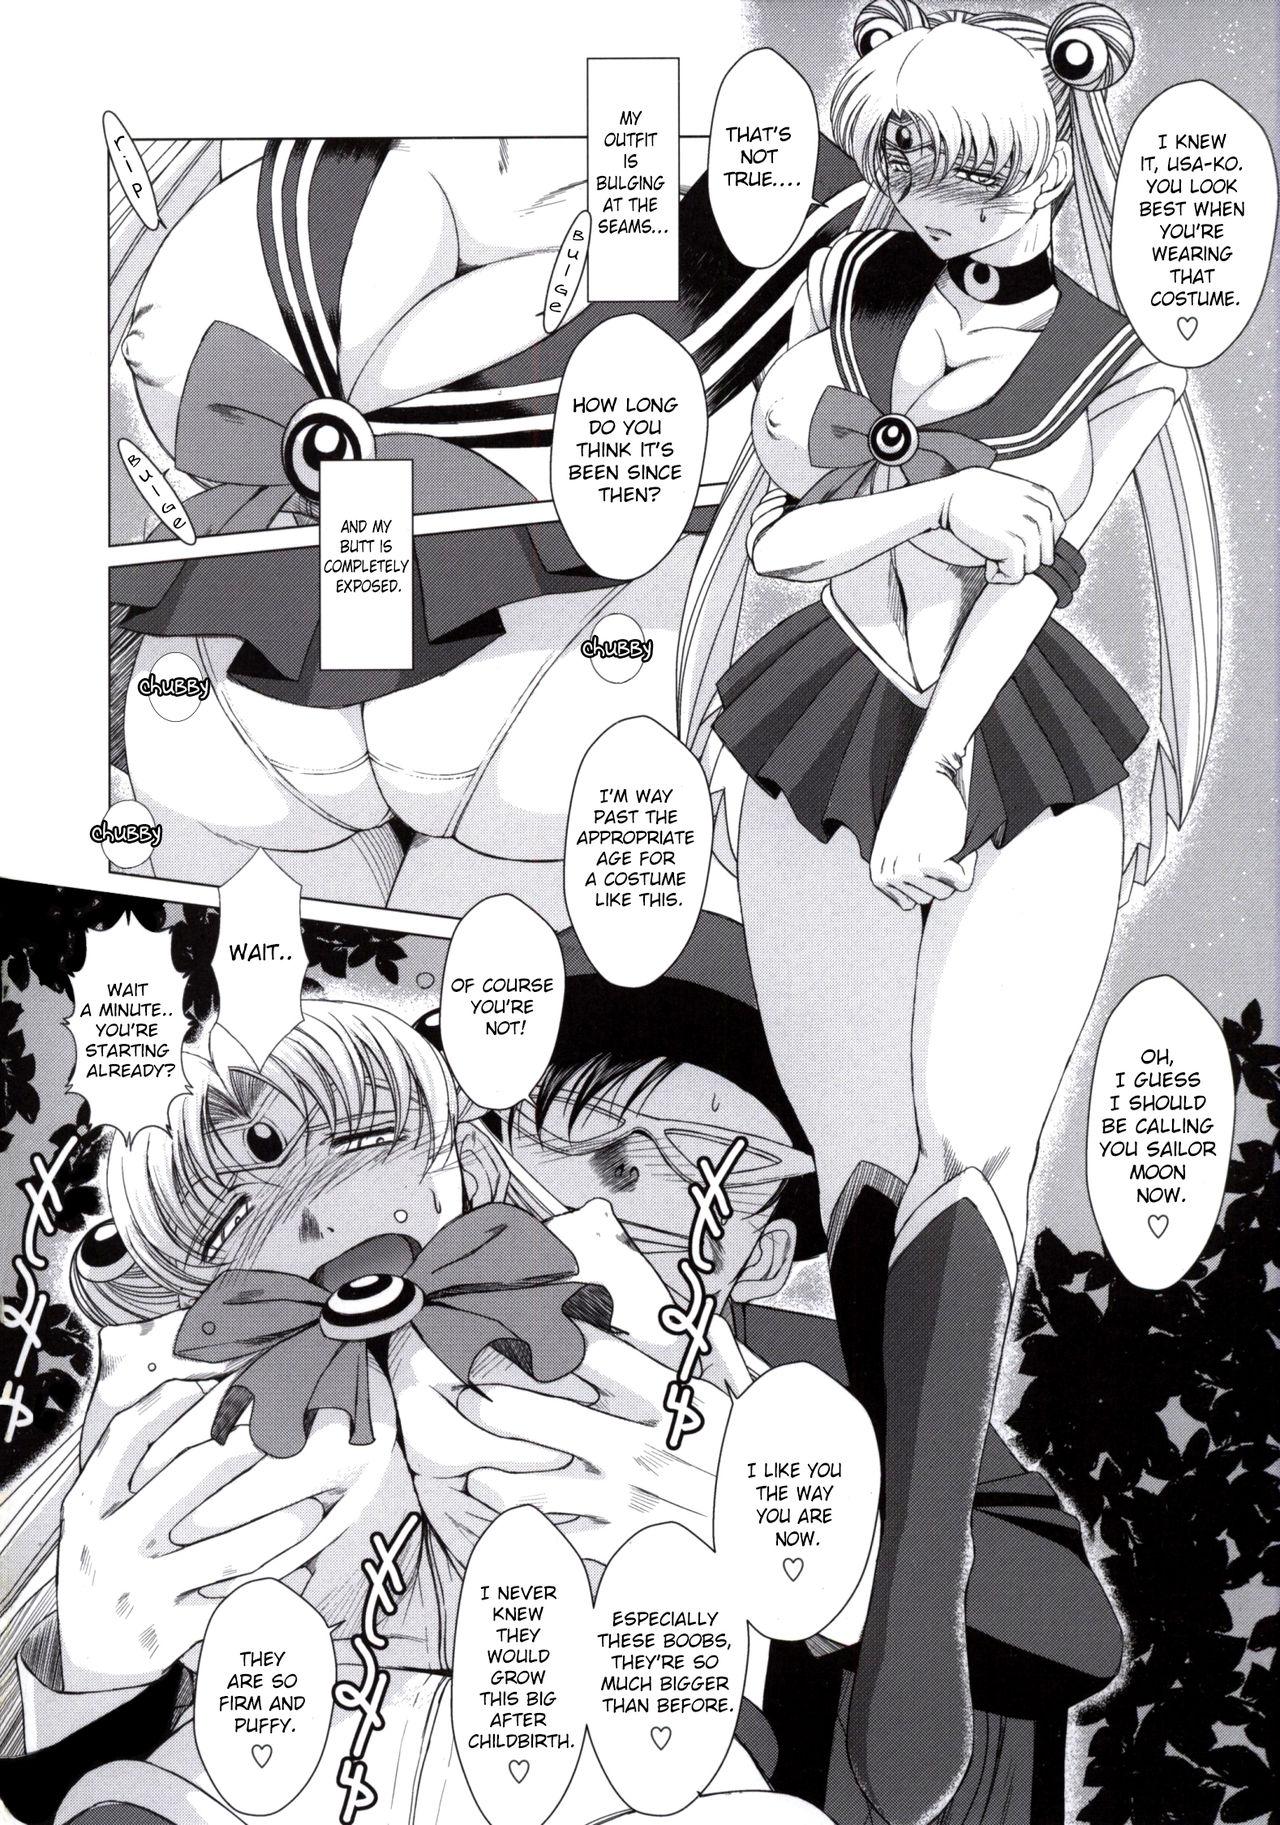 Double Blowjob Submission Sailormoon After/Midgard - Sailor moon Ah my goddess Uncensored - Page 3